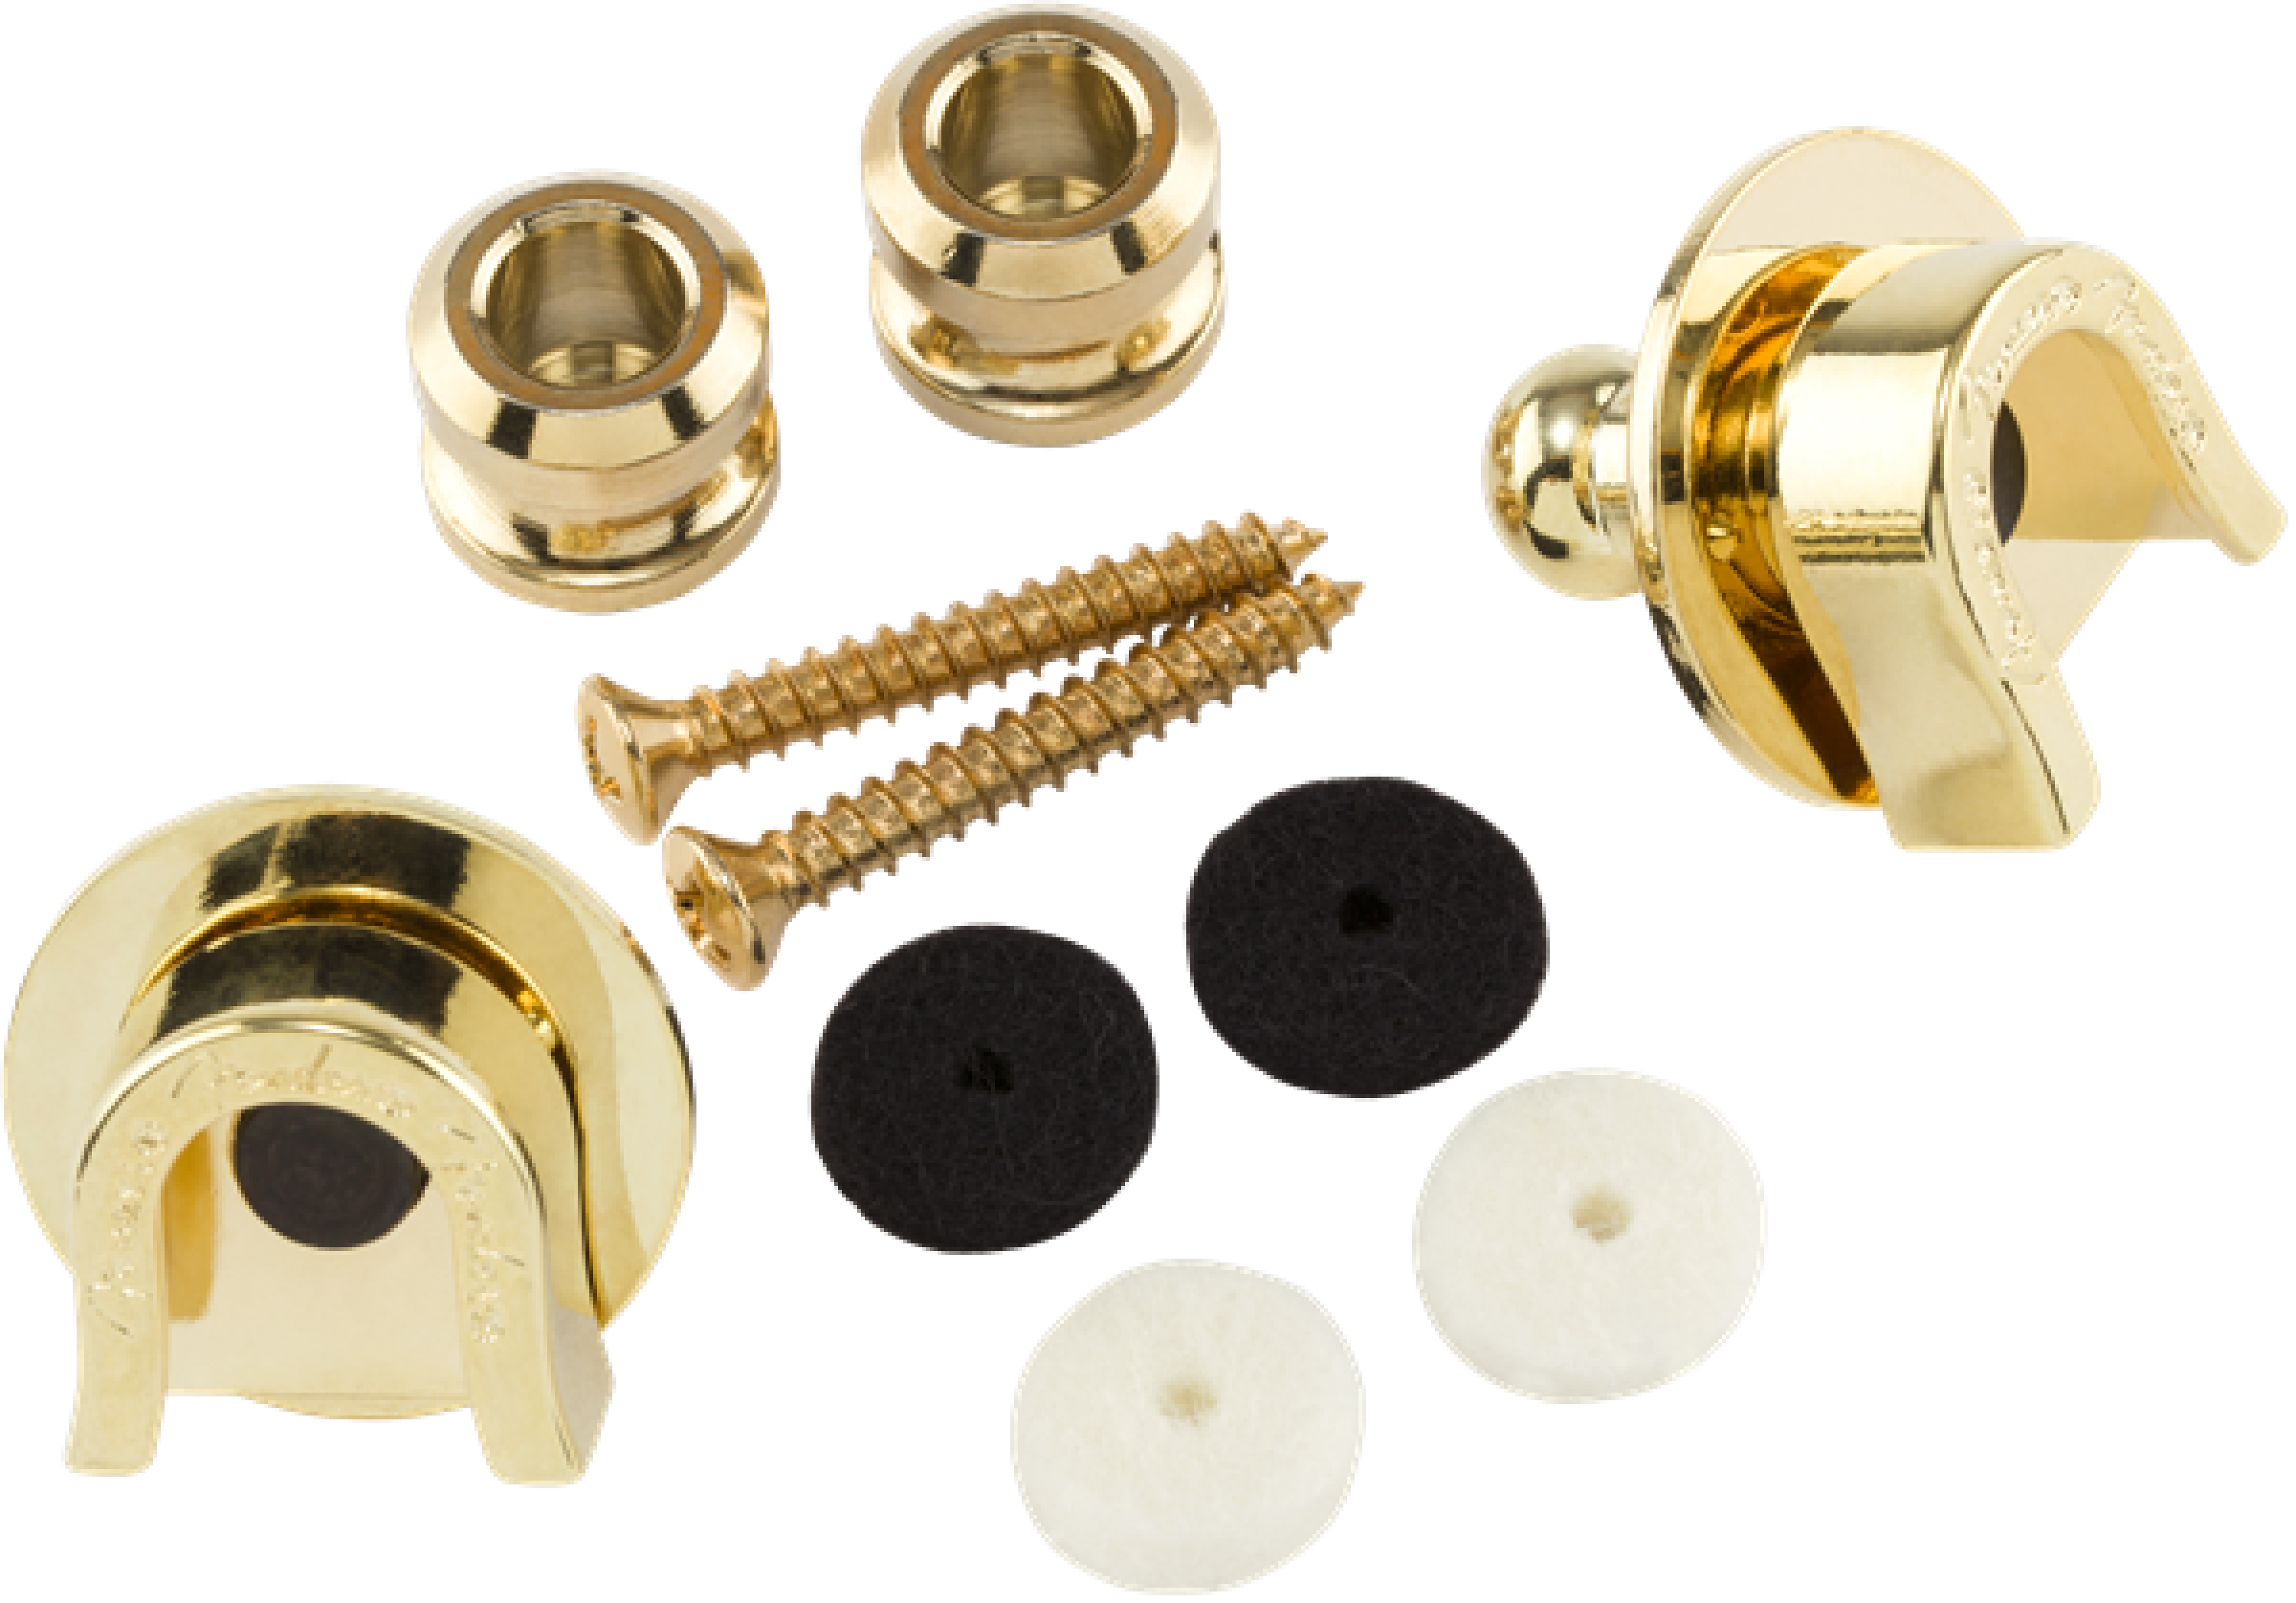 Fender Strap Locks and Buttons Set - Gold